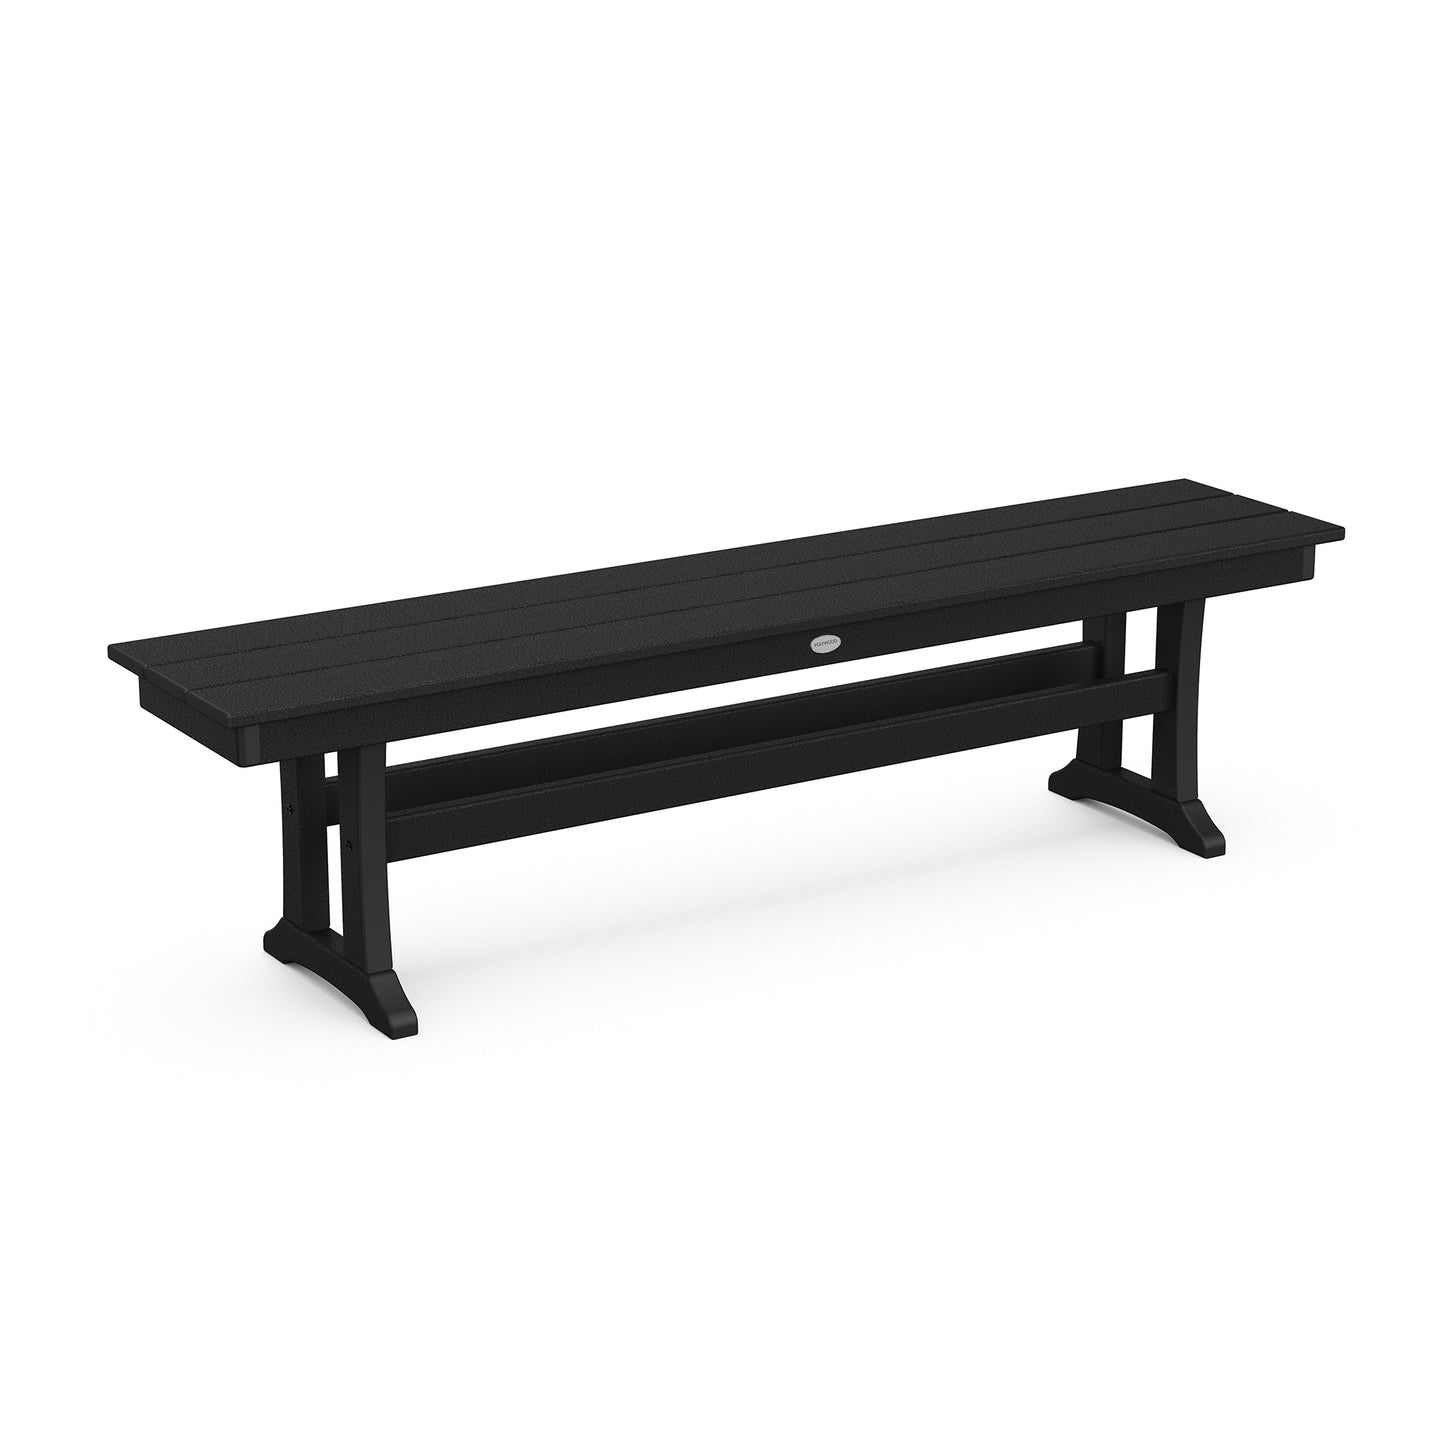 A black POLYWOOD Farmhouse Trestle 65" Bench with a slatted seat and backless design, featuring curved POLYWOOD lumber legs, positioned on a white background.